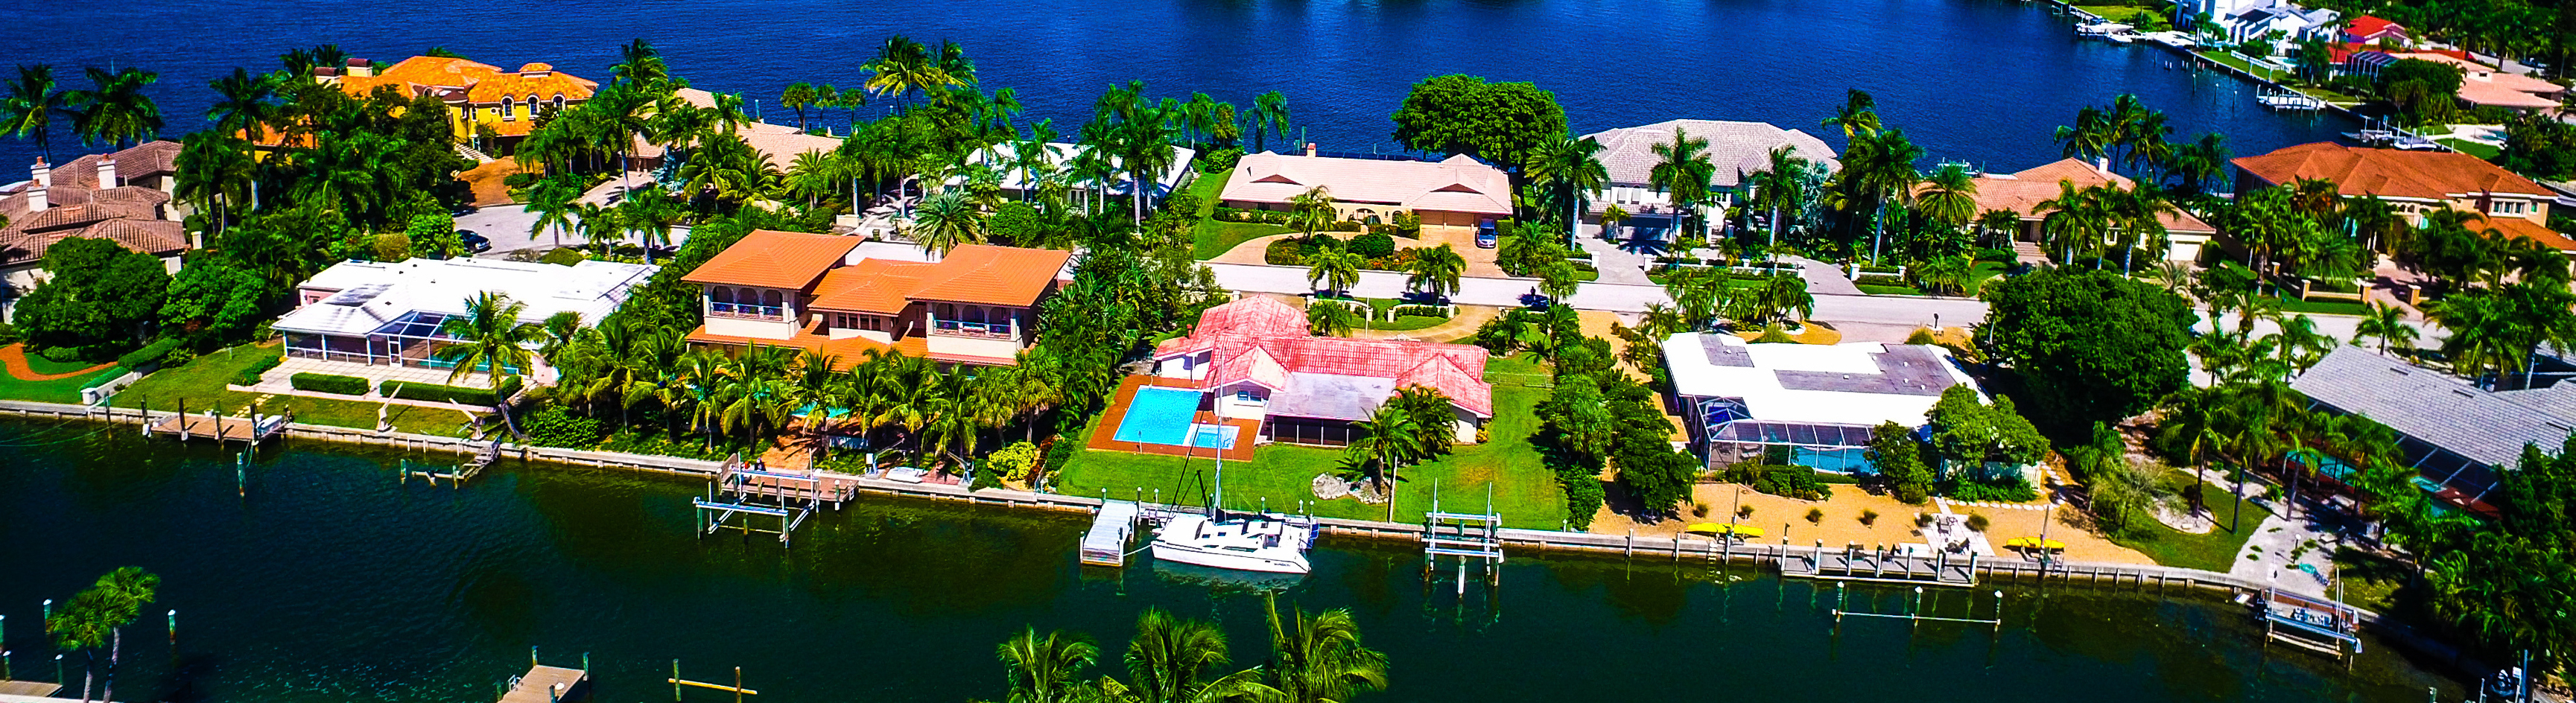 Bird Key Homes for Sale